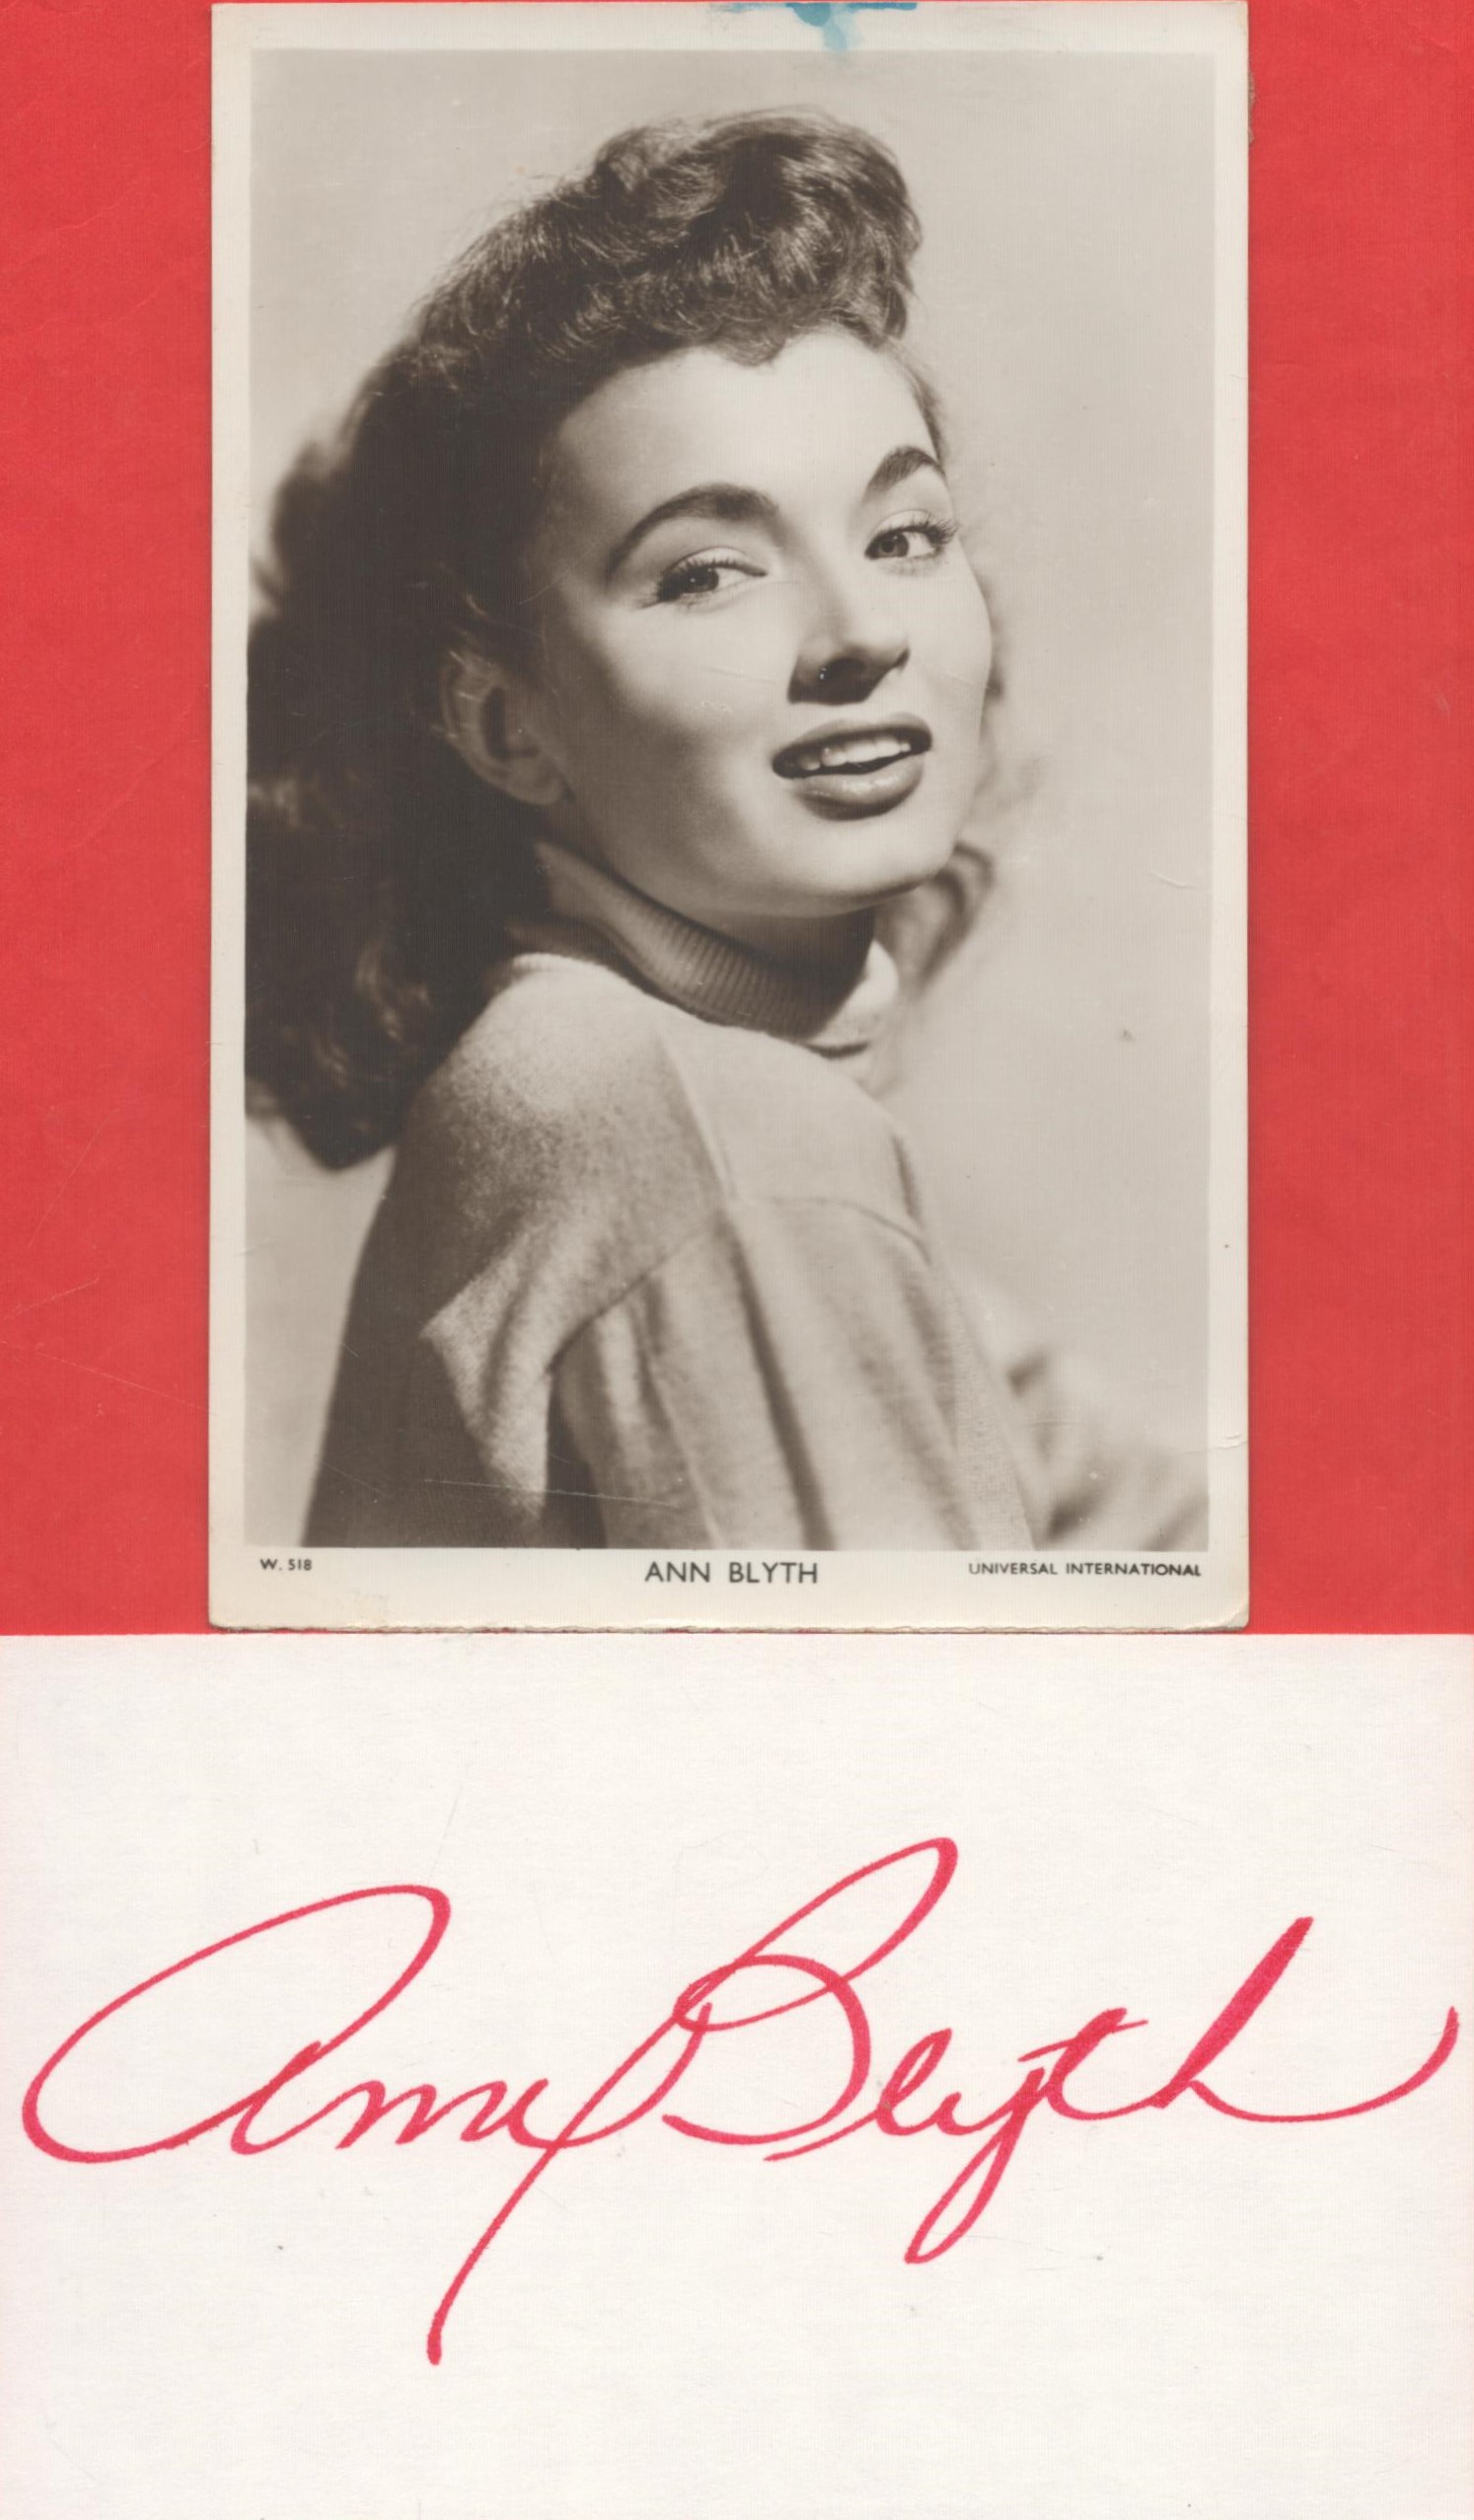 Ann Blyth signed album page and vintage 6x4 black and white photo. Good condition. All autographs